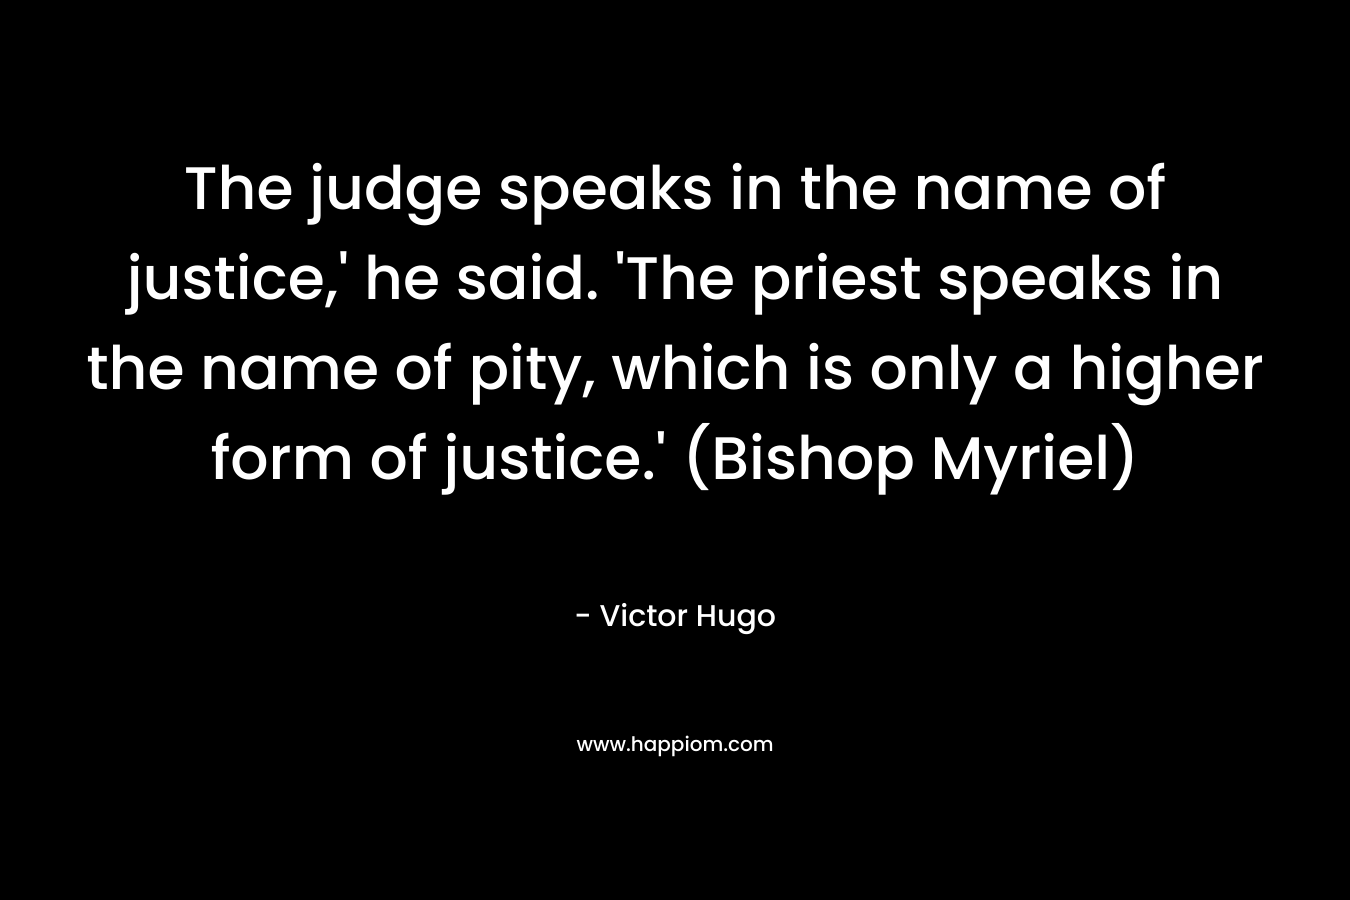 The judge speaks in the name of justice,' he said. 'The priest speaks in the name of pity, which is only a higher form of justice.' (Bishop Myriel)